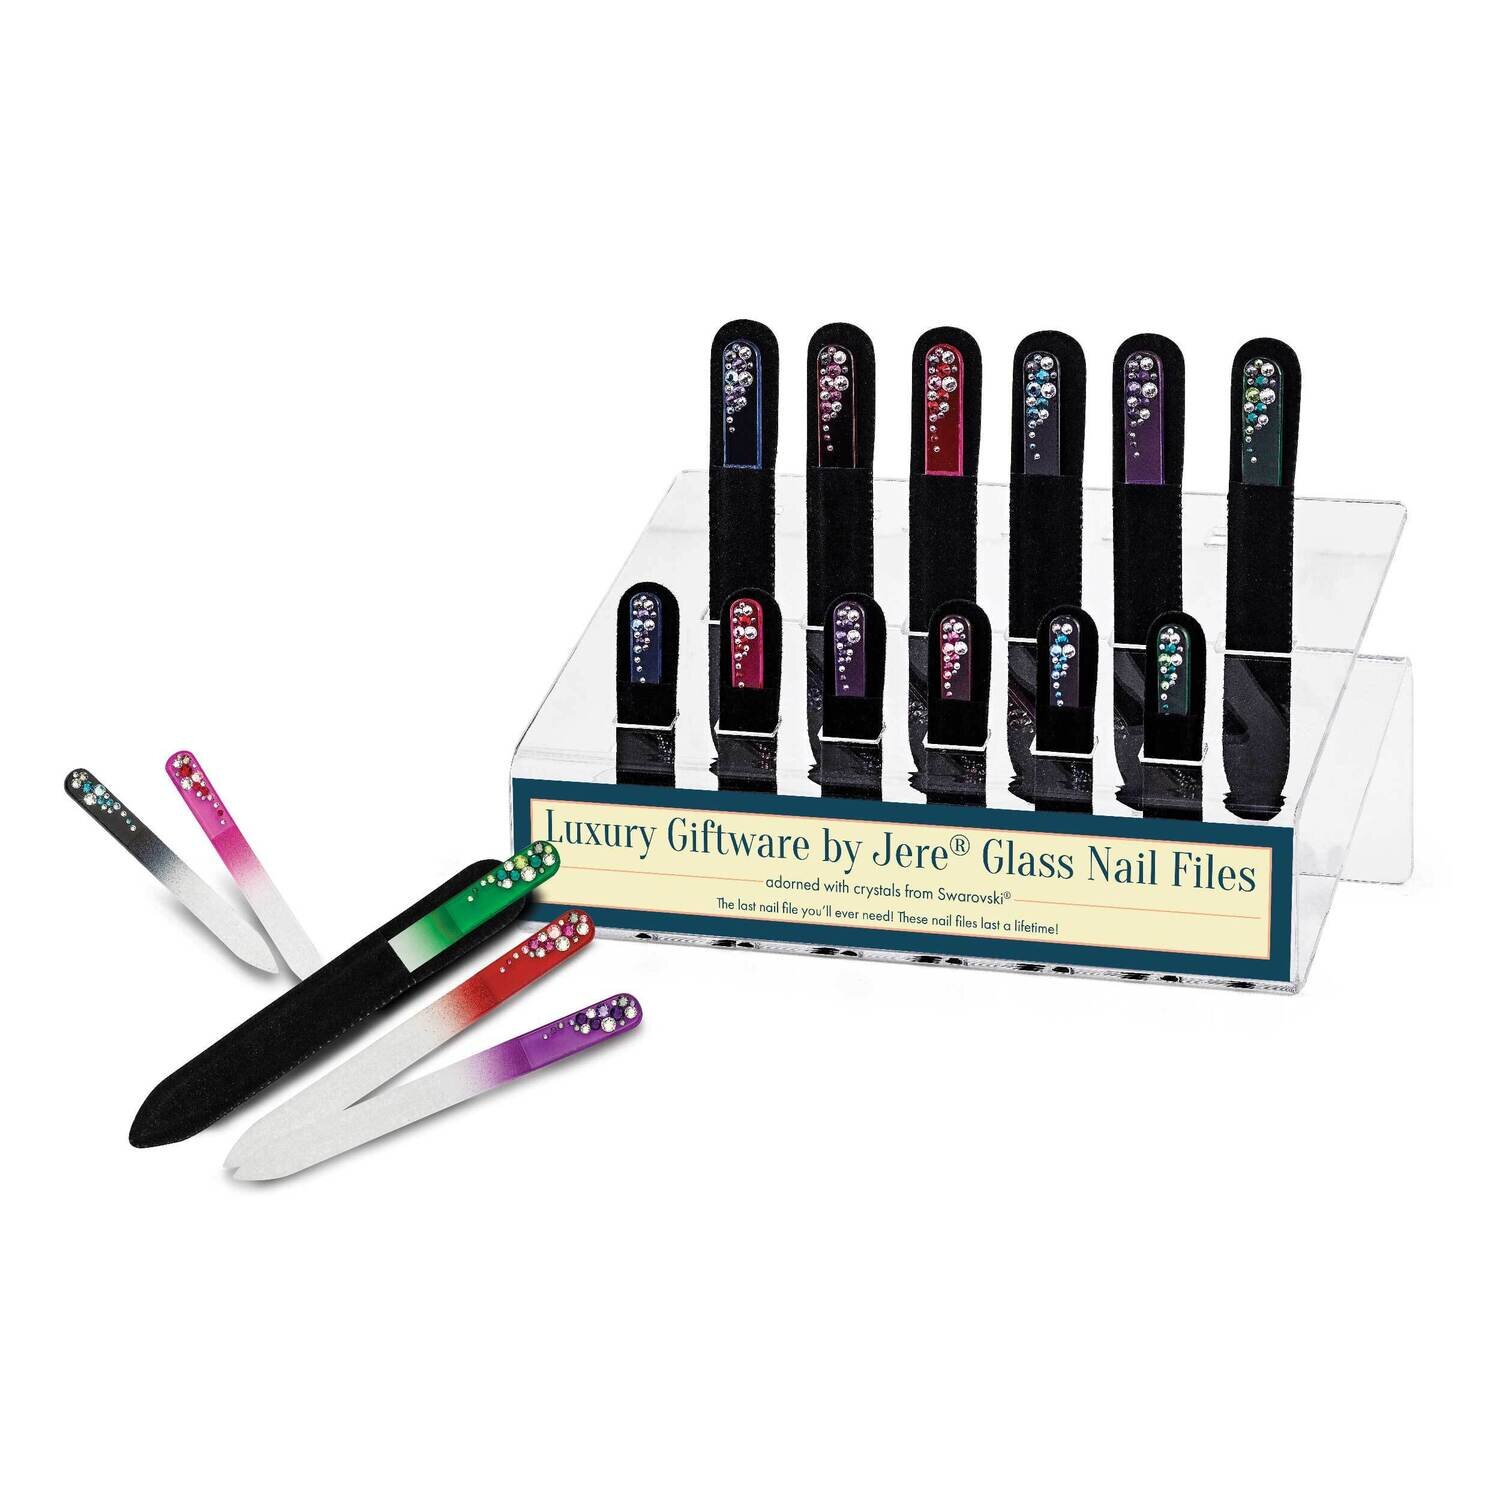 By Jere Glass Nail File Kit with Acrylic Display Includes 36 Files and Velveteen Sleeves JNFKIT2